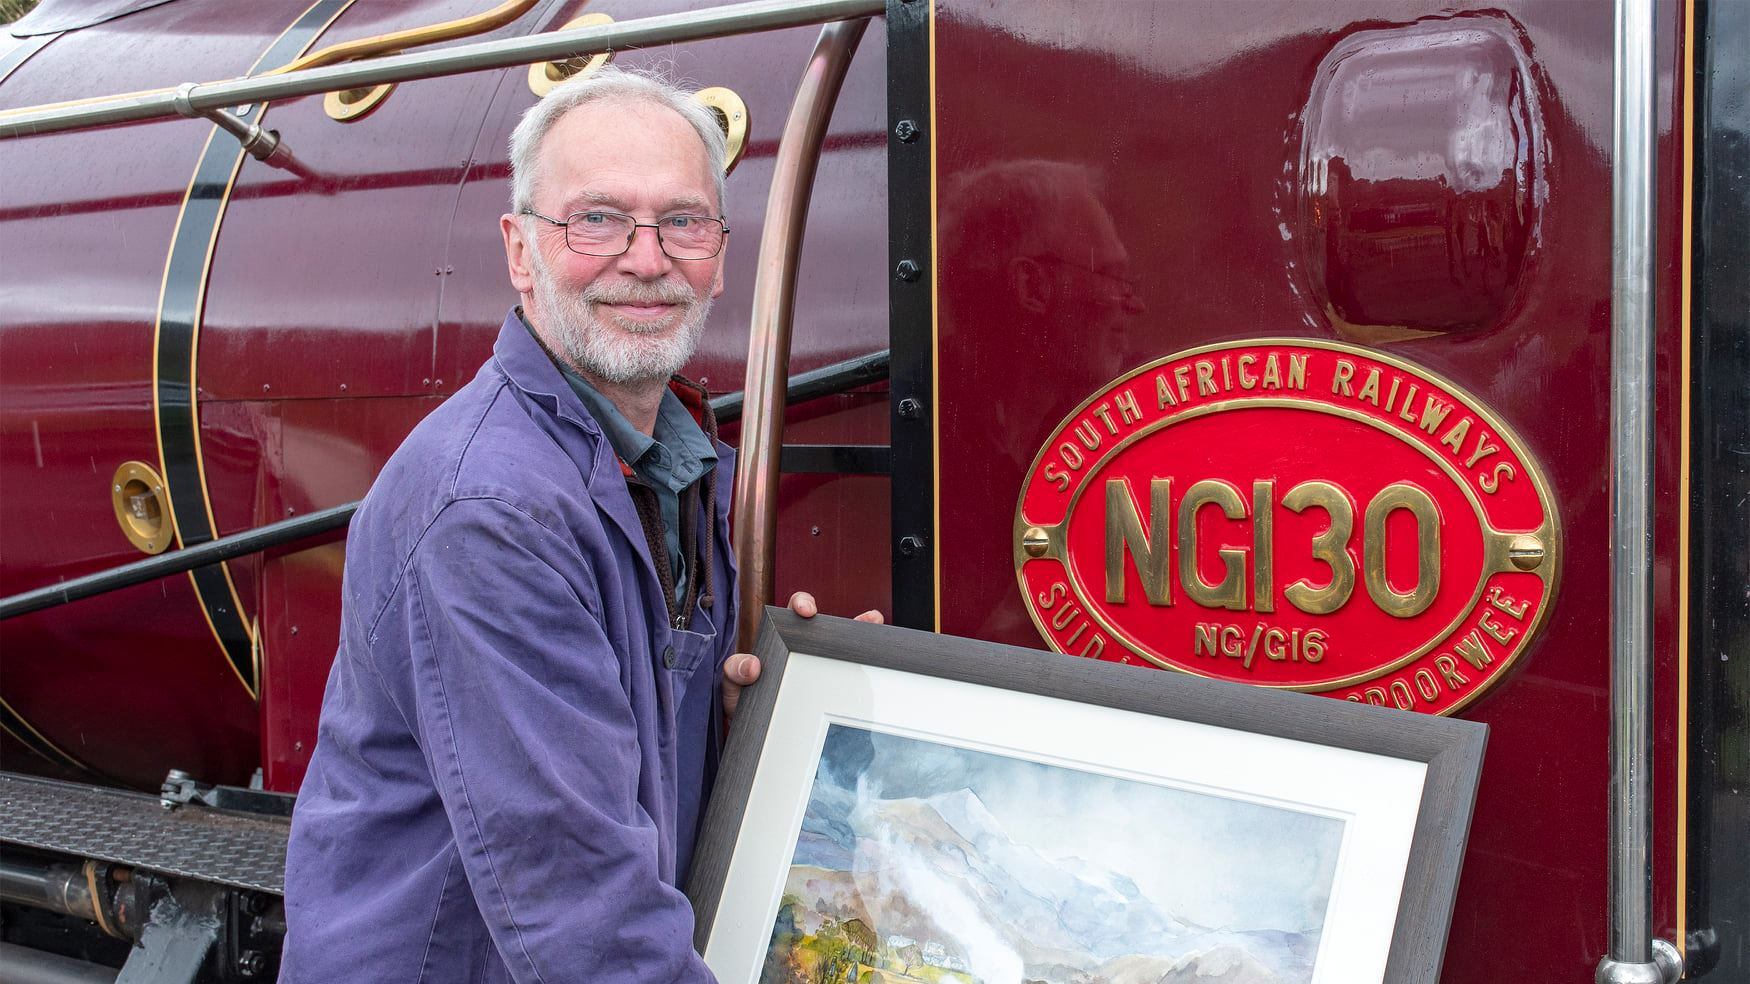 Steam engine restoration enthusiast Peter Best has been awarded a British Empire Medal for his contributions to heritage railways